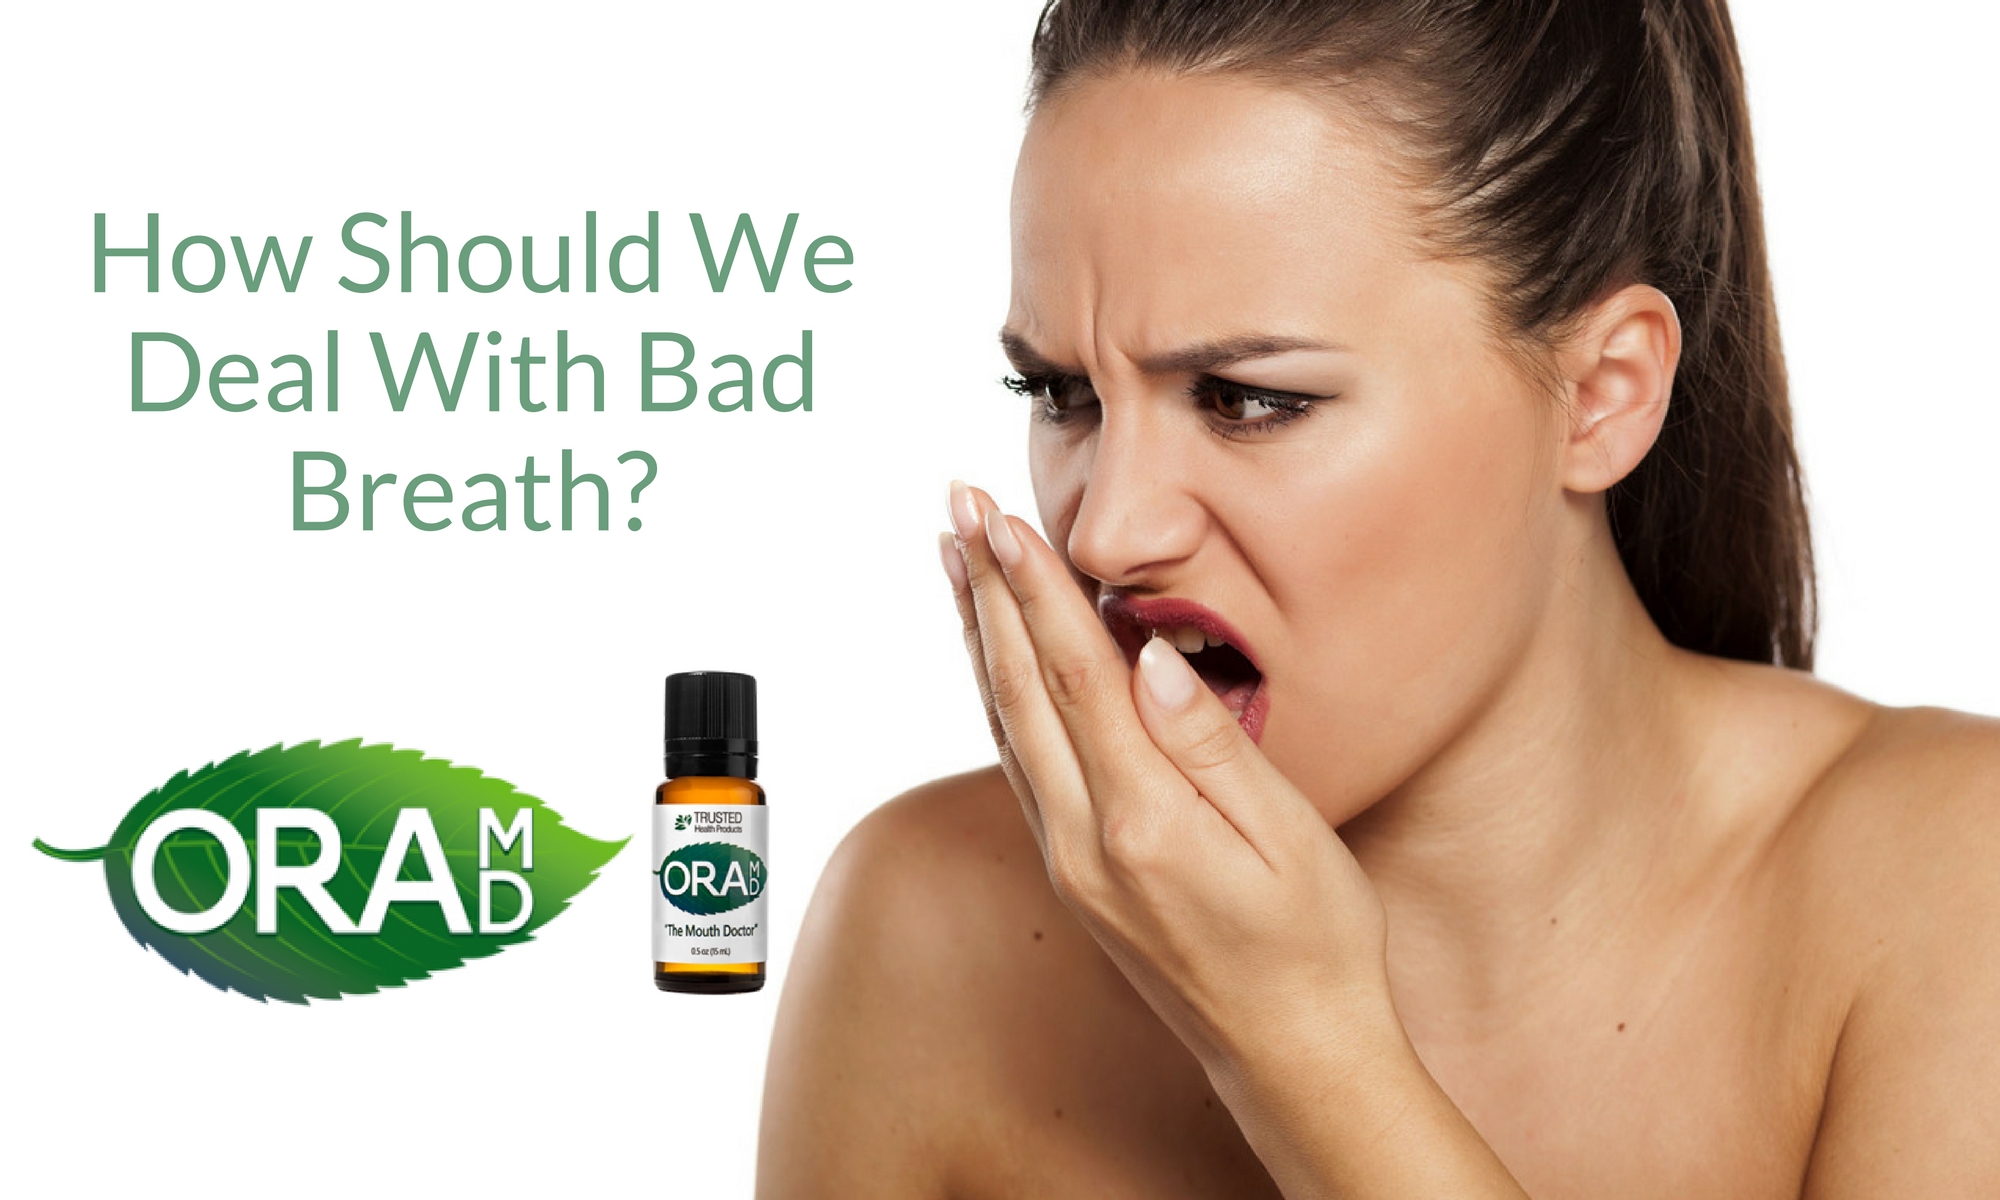 How to deal with bad breath